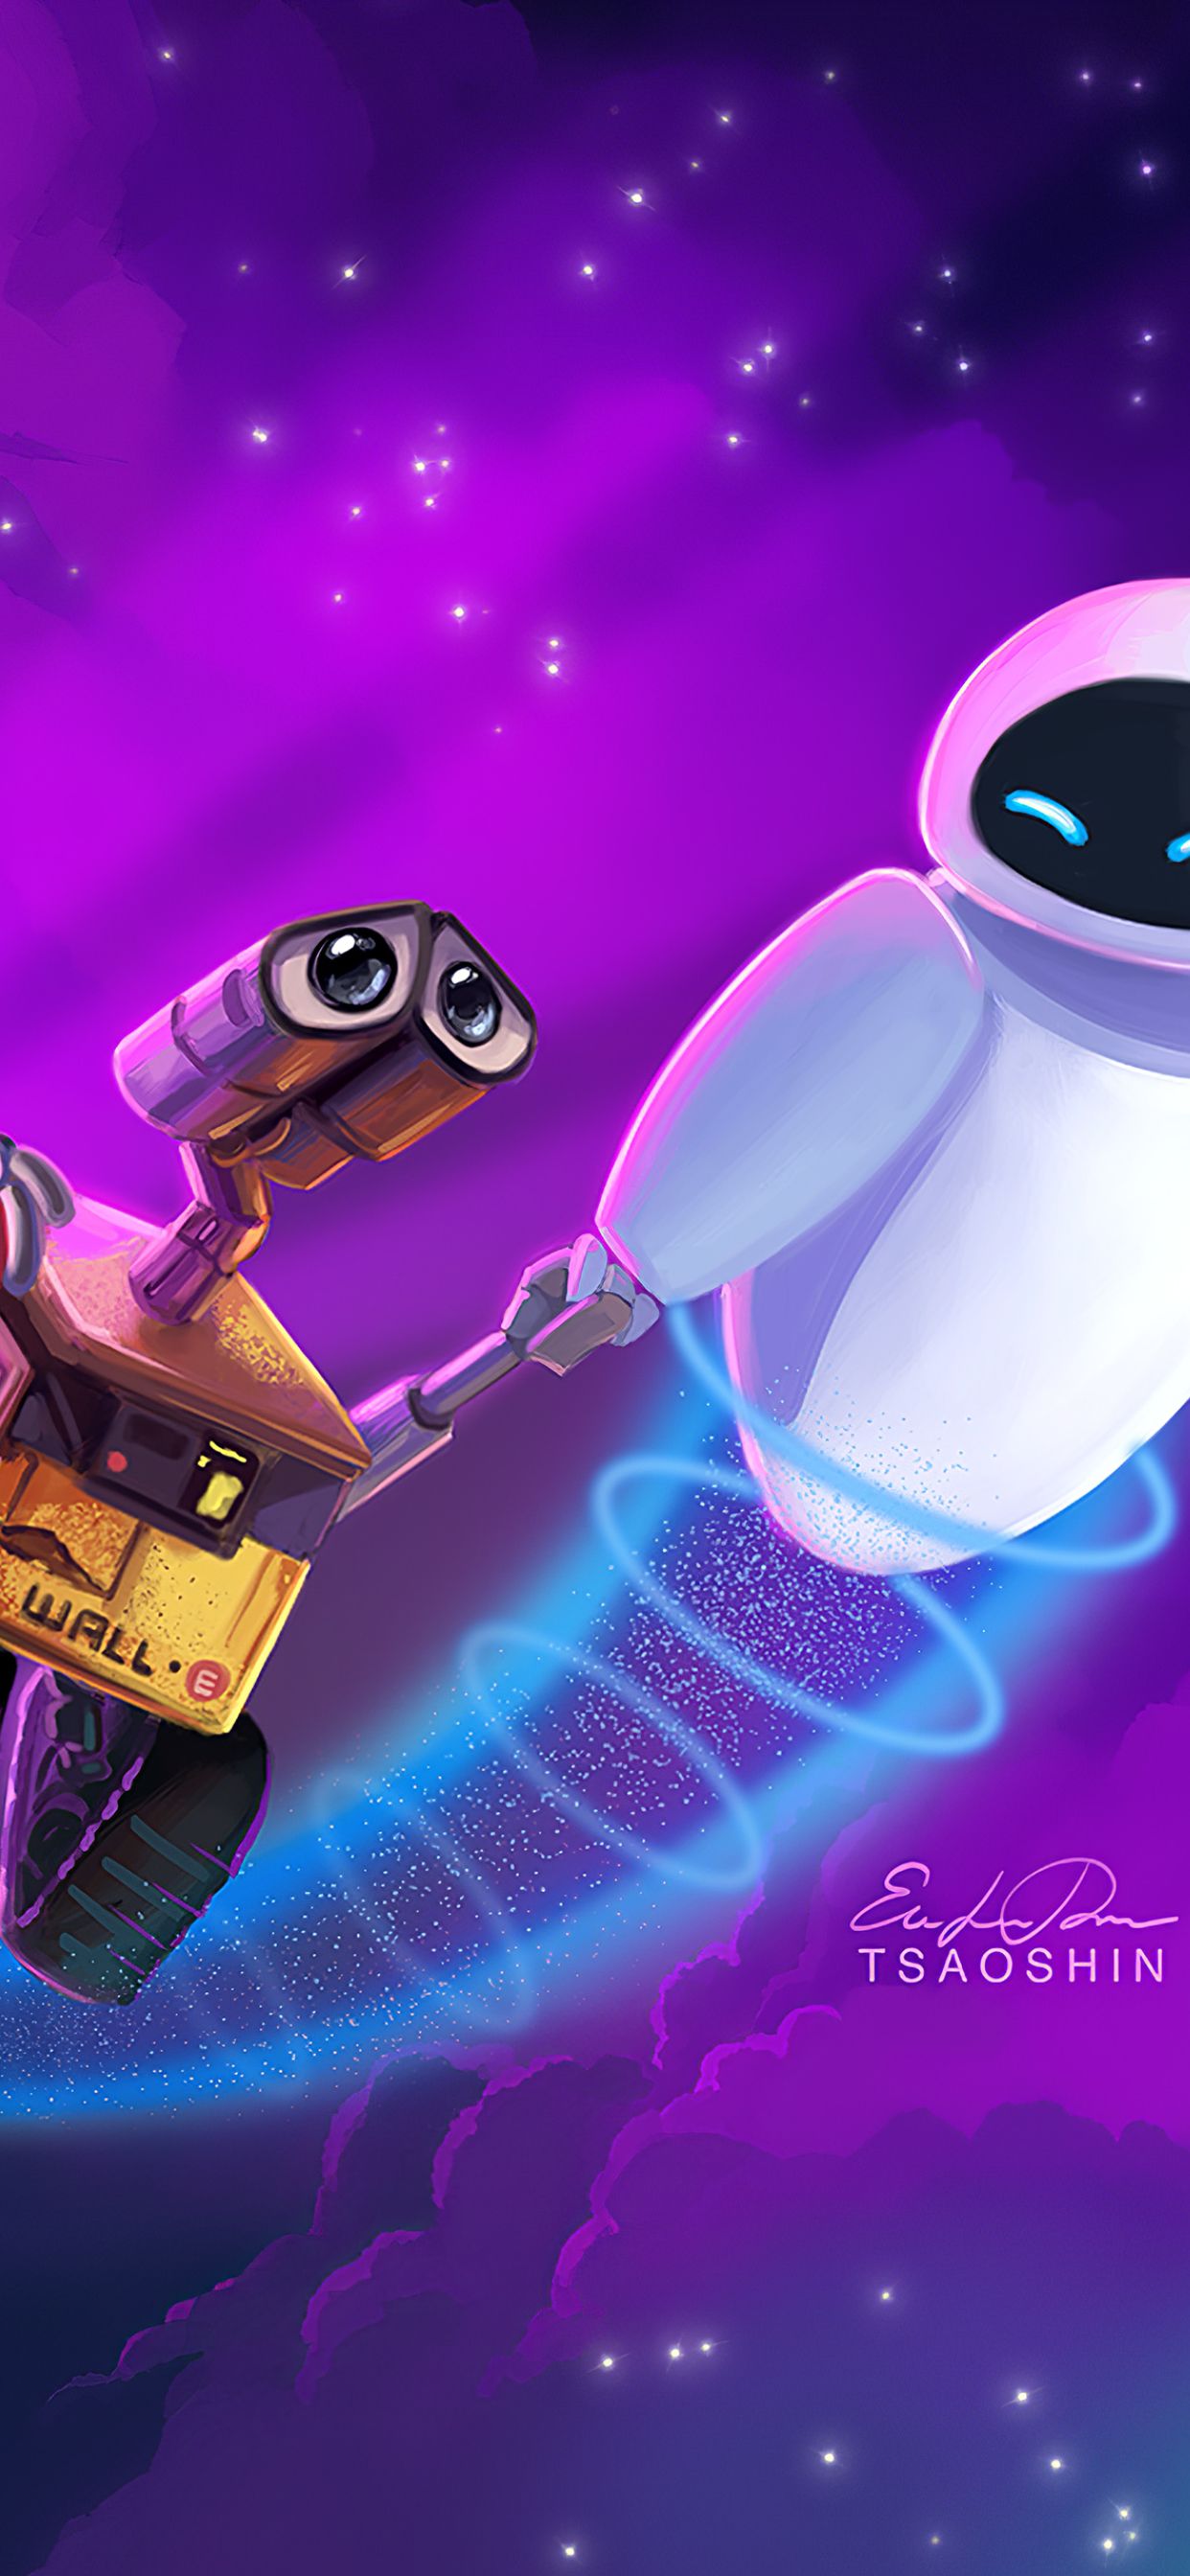 Wall E and Eve iPhone XS MAX Wallpaper, HD Movies 4K